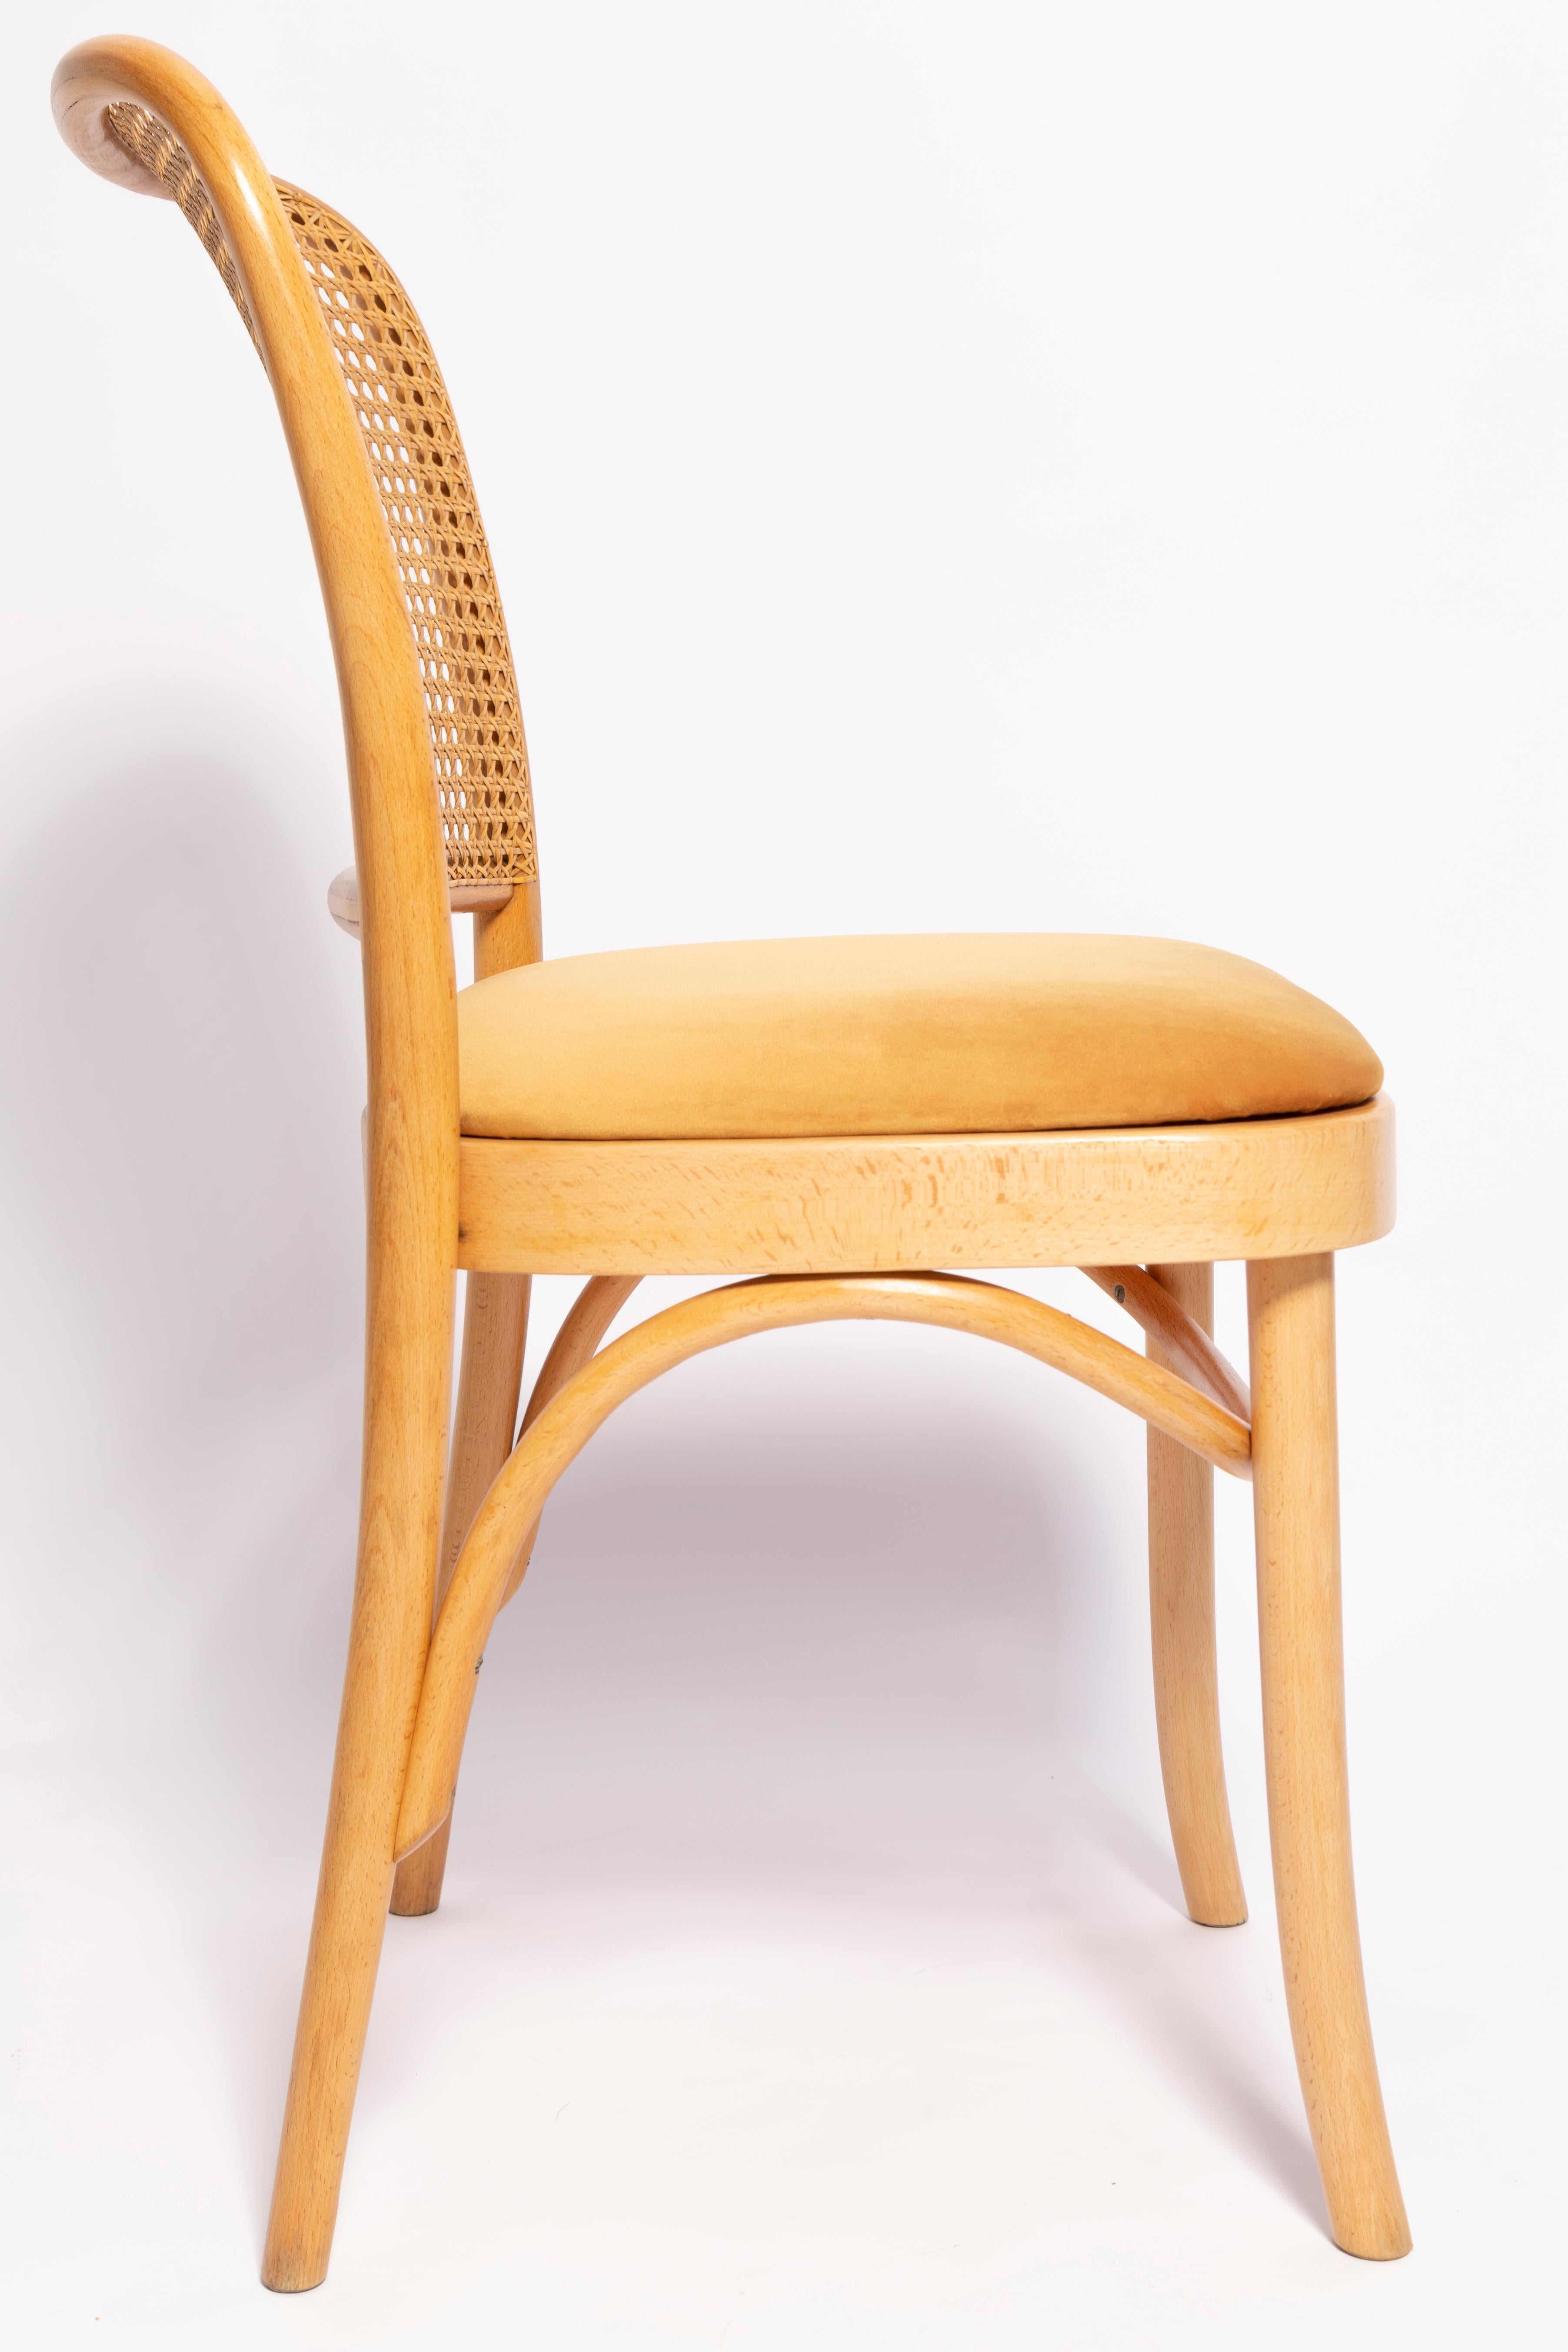 Set of Six Mid Century Yellow Velvet Thonet Wood Rattan Chairs, Europe, 1960s For Sale 2